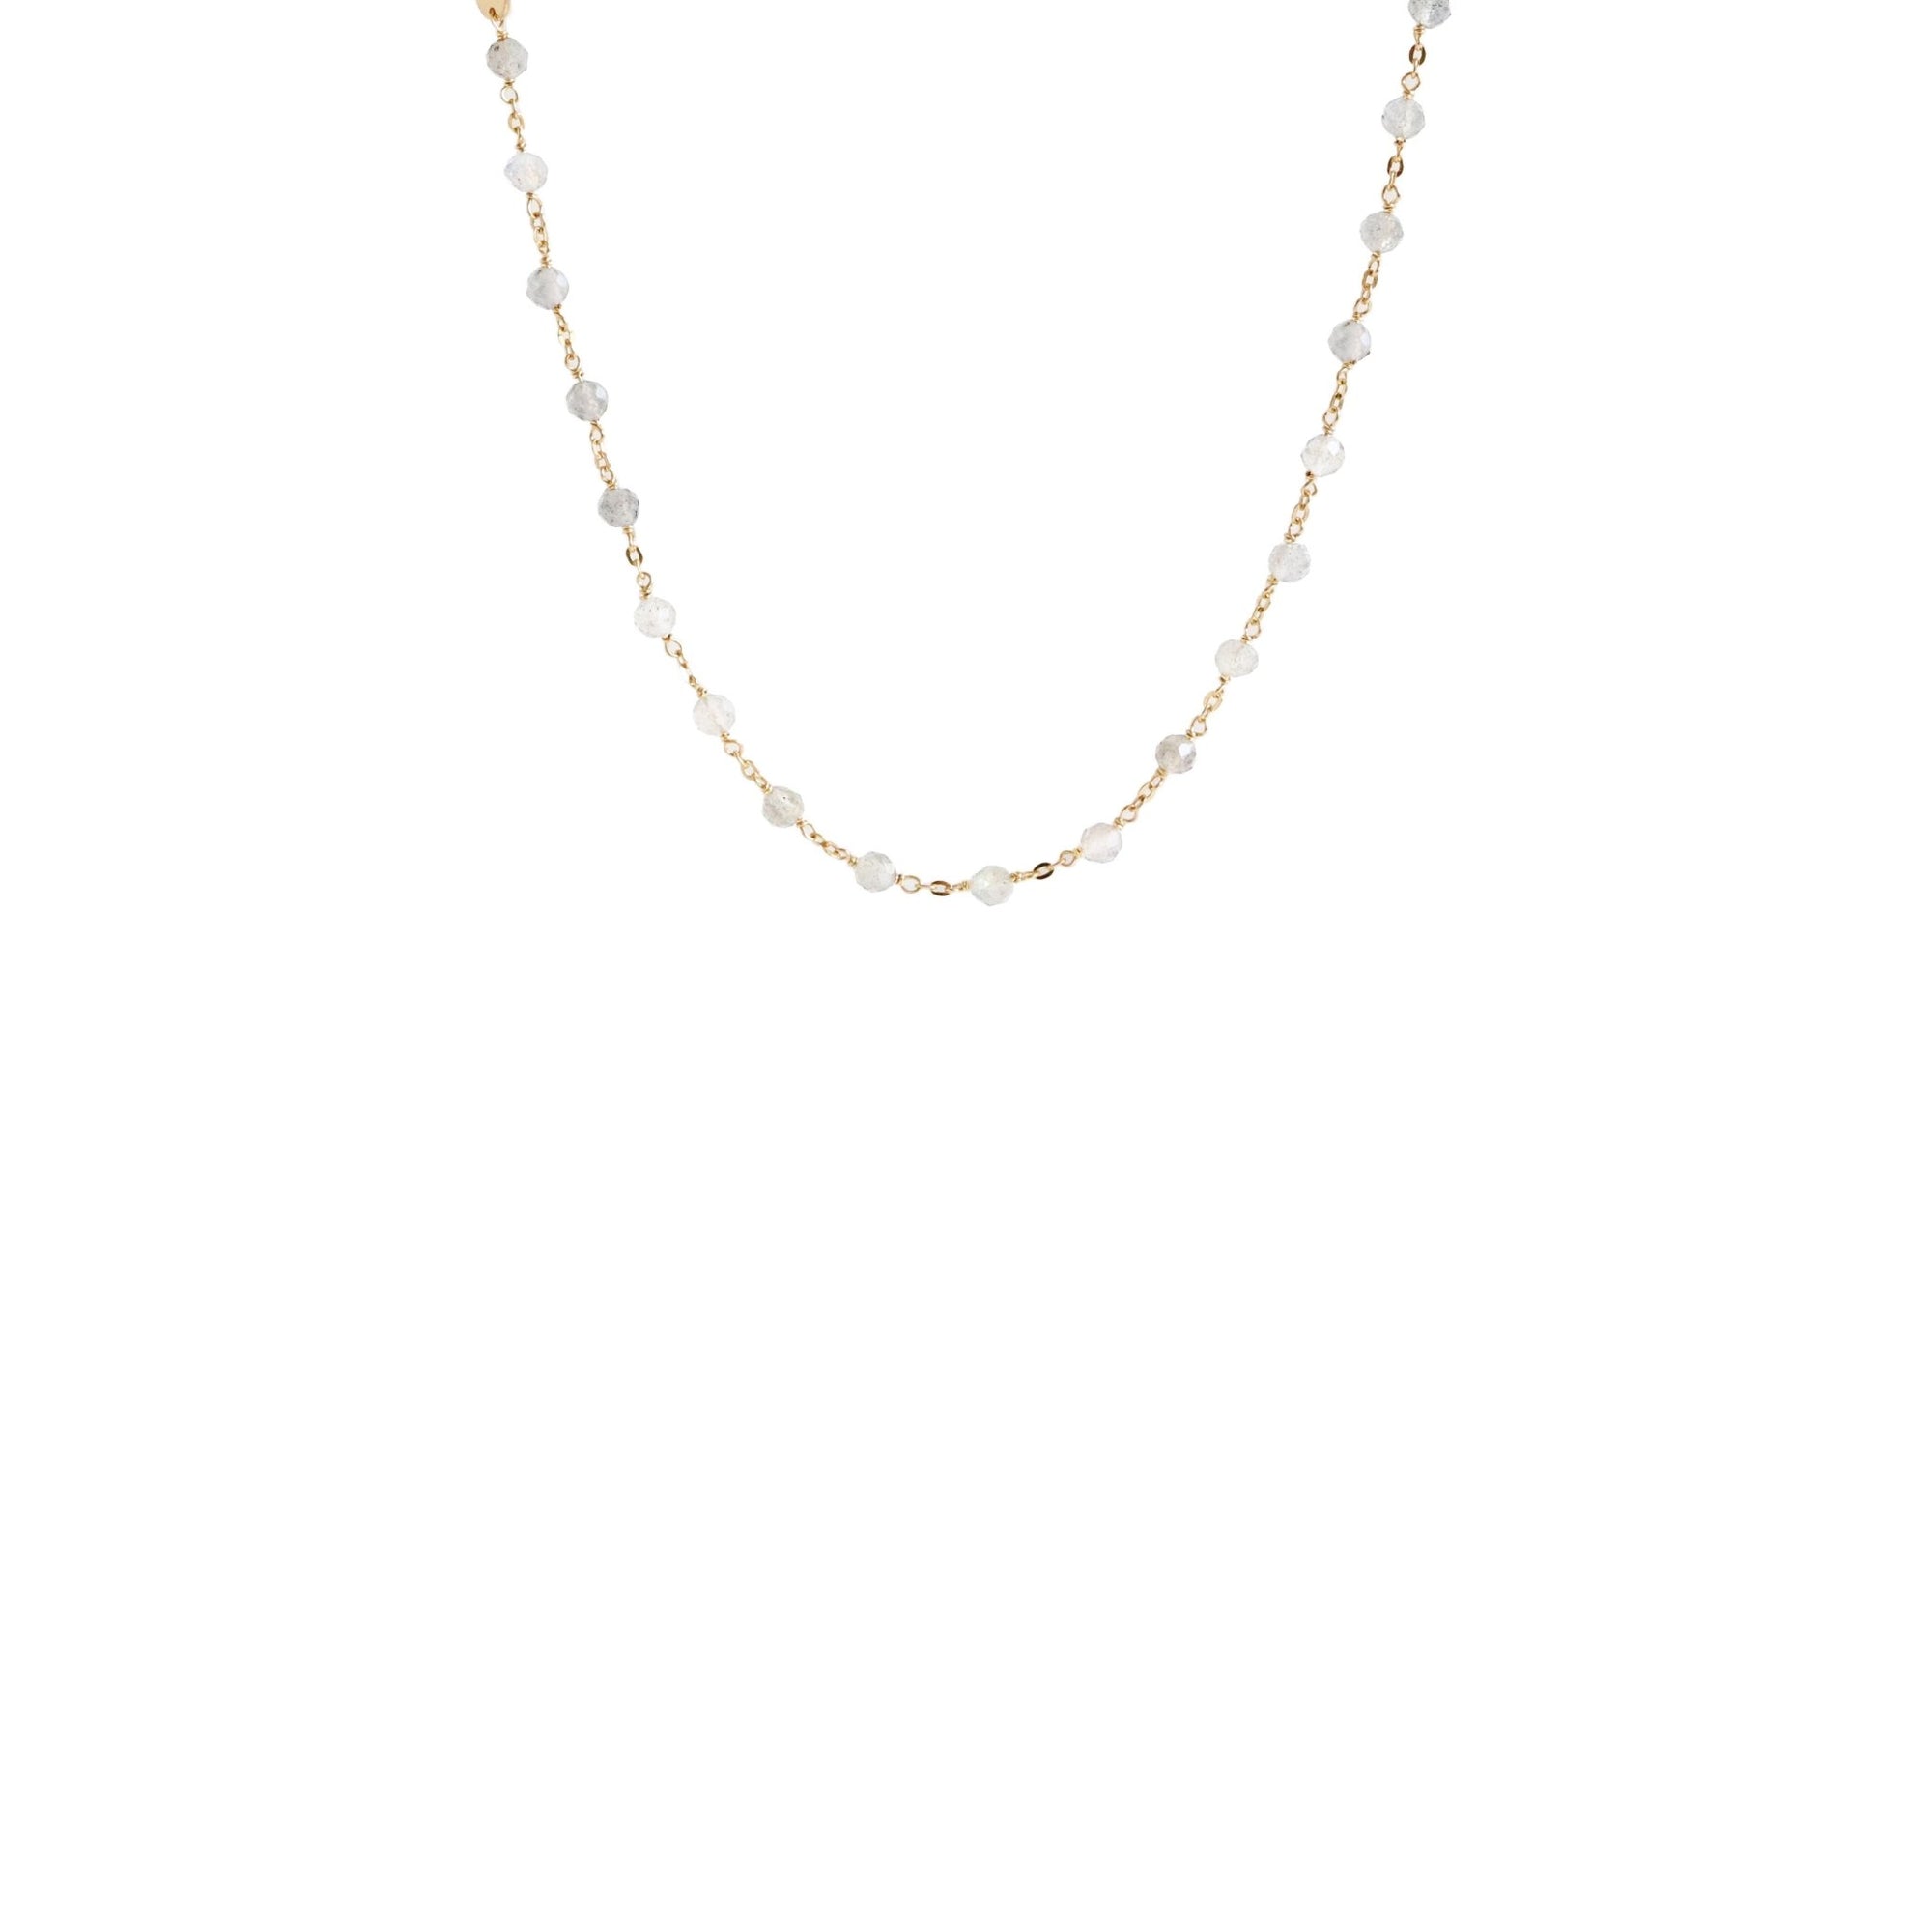 ICONIC SHORT BEADED NECKLACE - RAINBOW MOONSTONE & GOLD 16-20" - SO PRETTY CARA COTTER